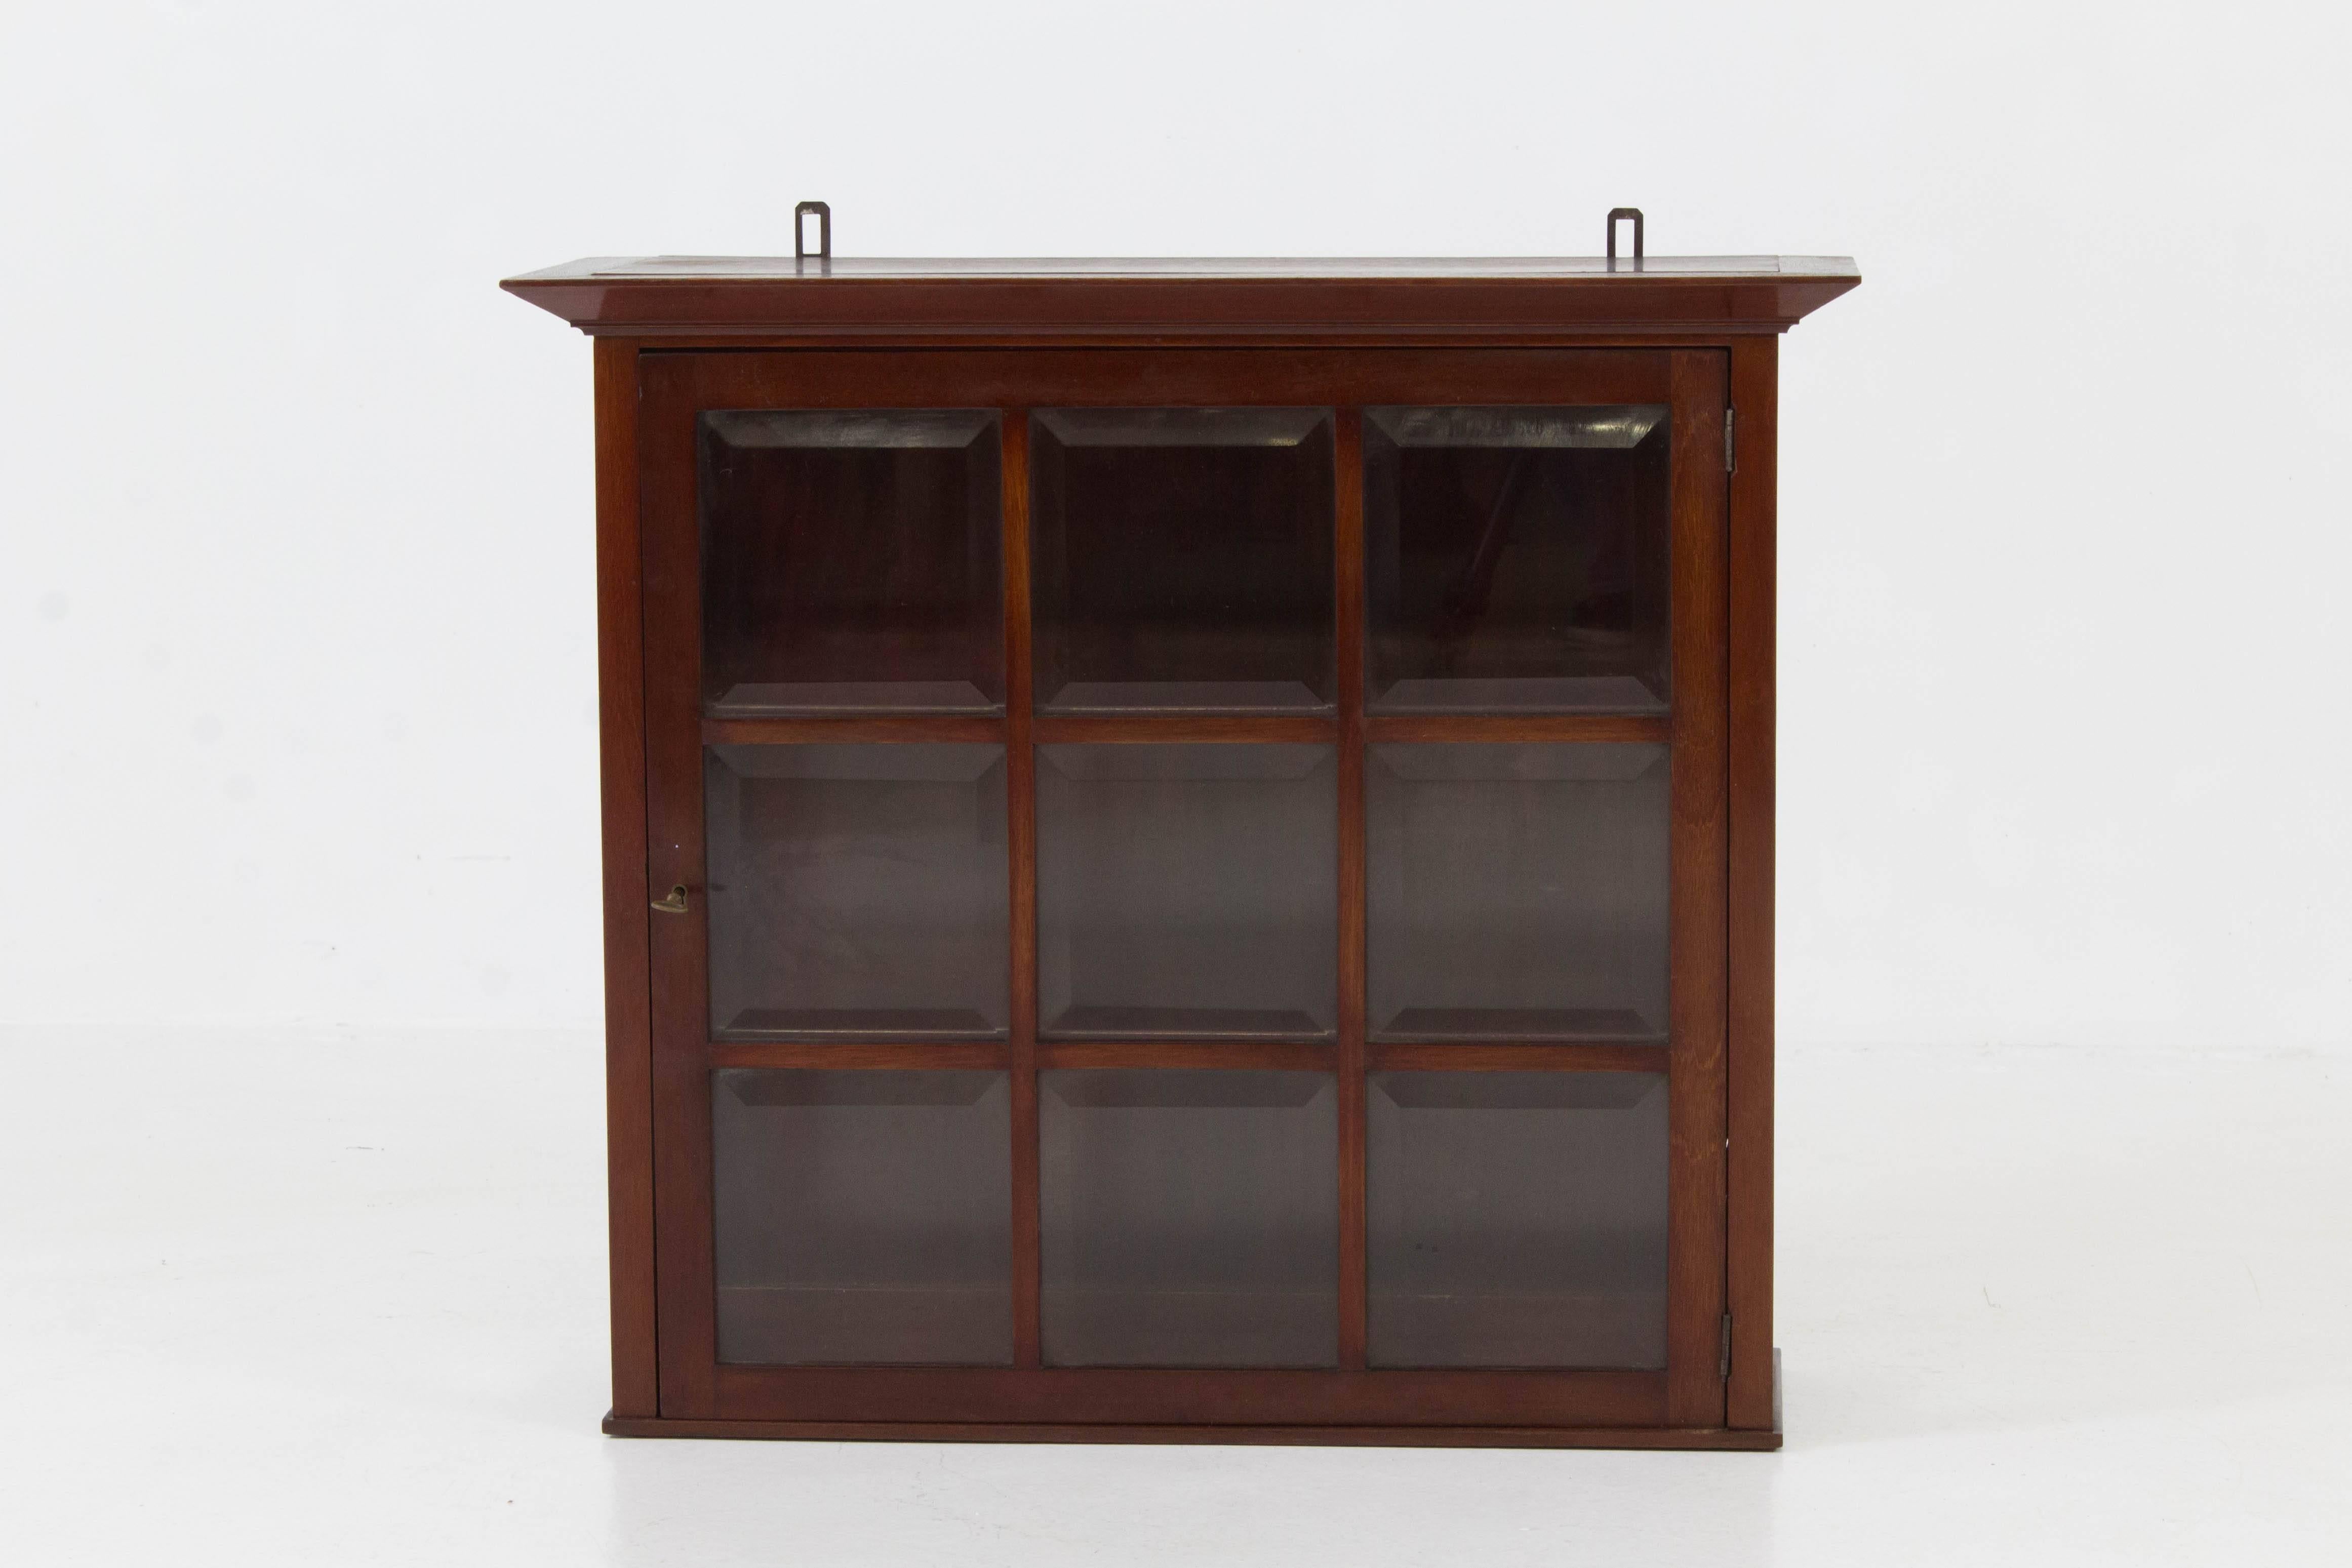 Elegant Dutch Art Nouveau wall cabinet with beveled glass, 1900s.
Solid mahogany with original key.
In good original condition with minor wear consistent with age and use,
preserving a beautiful patina.